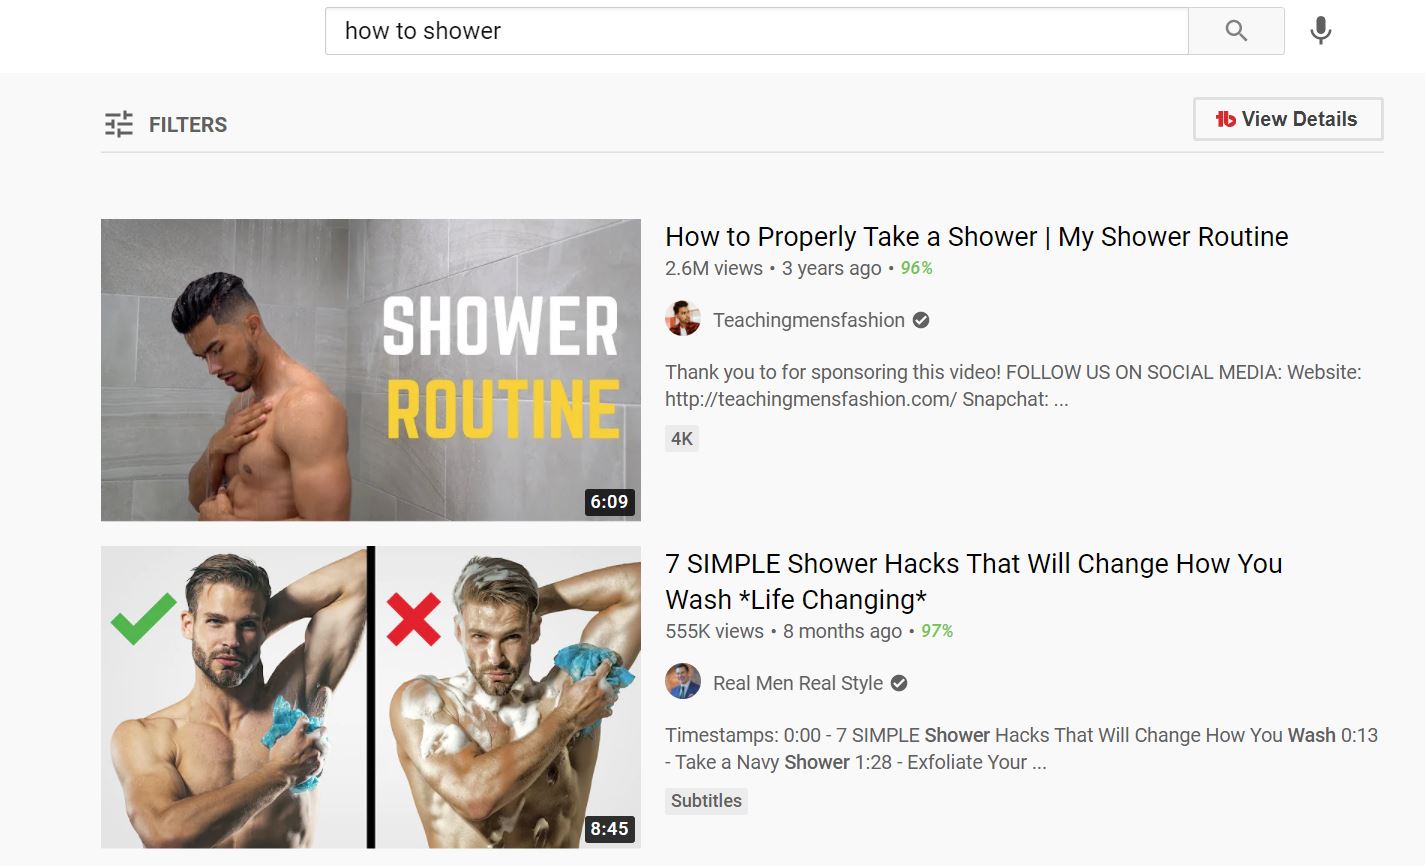 How to shower